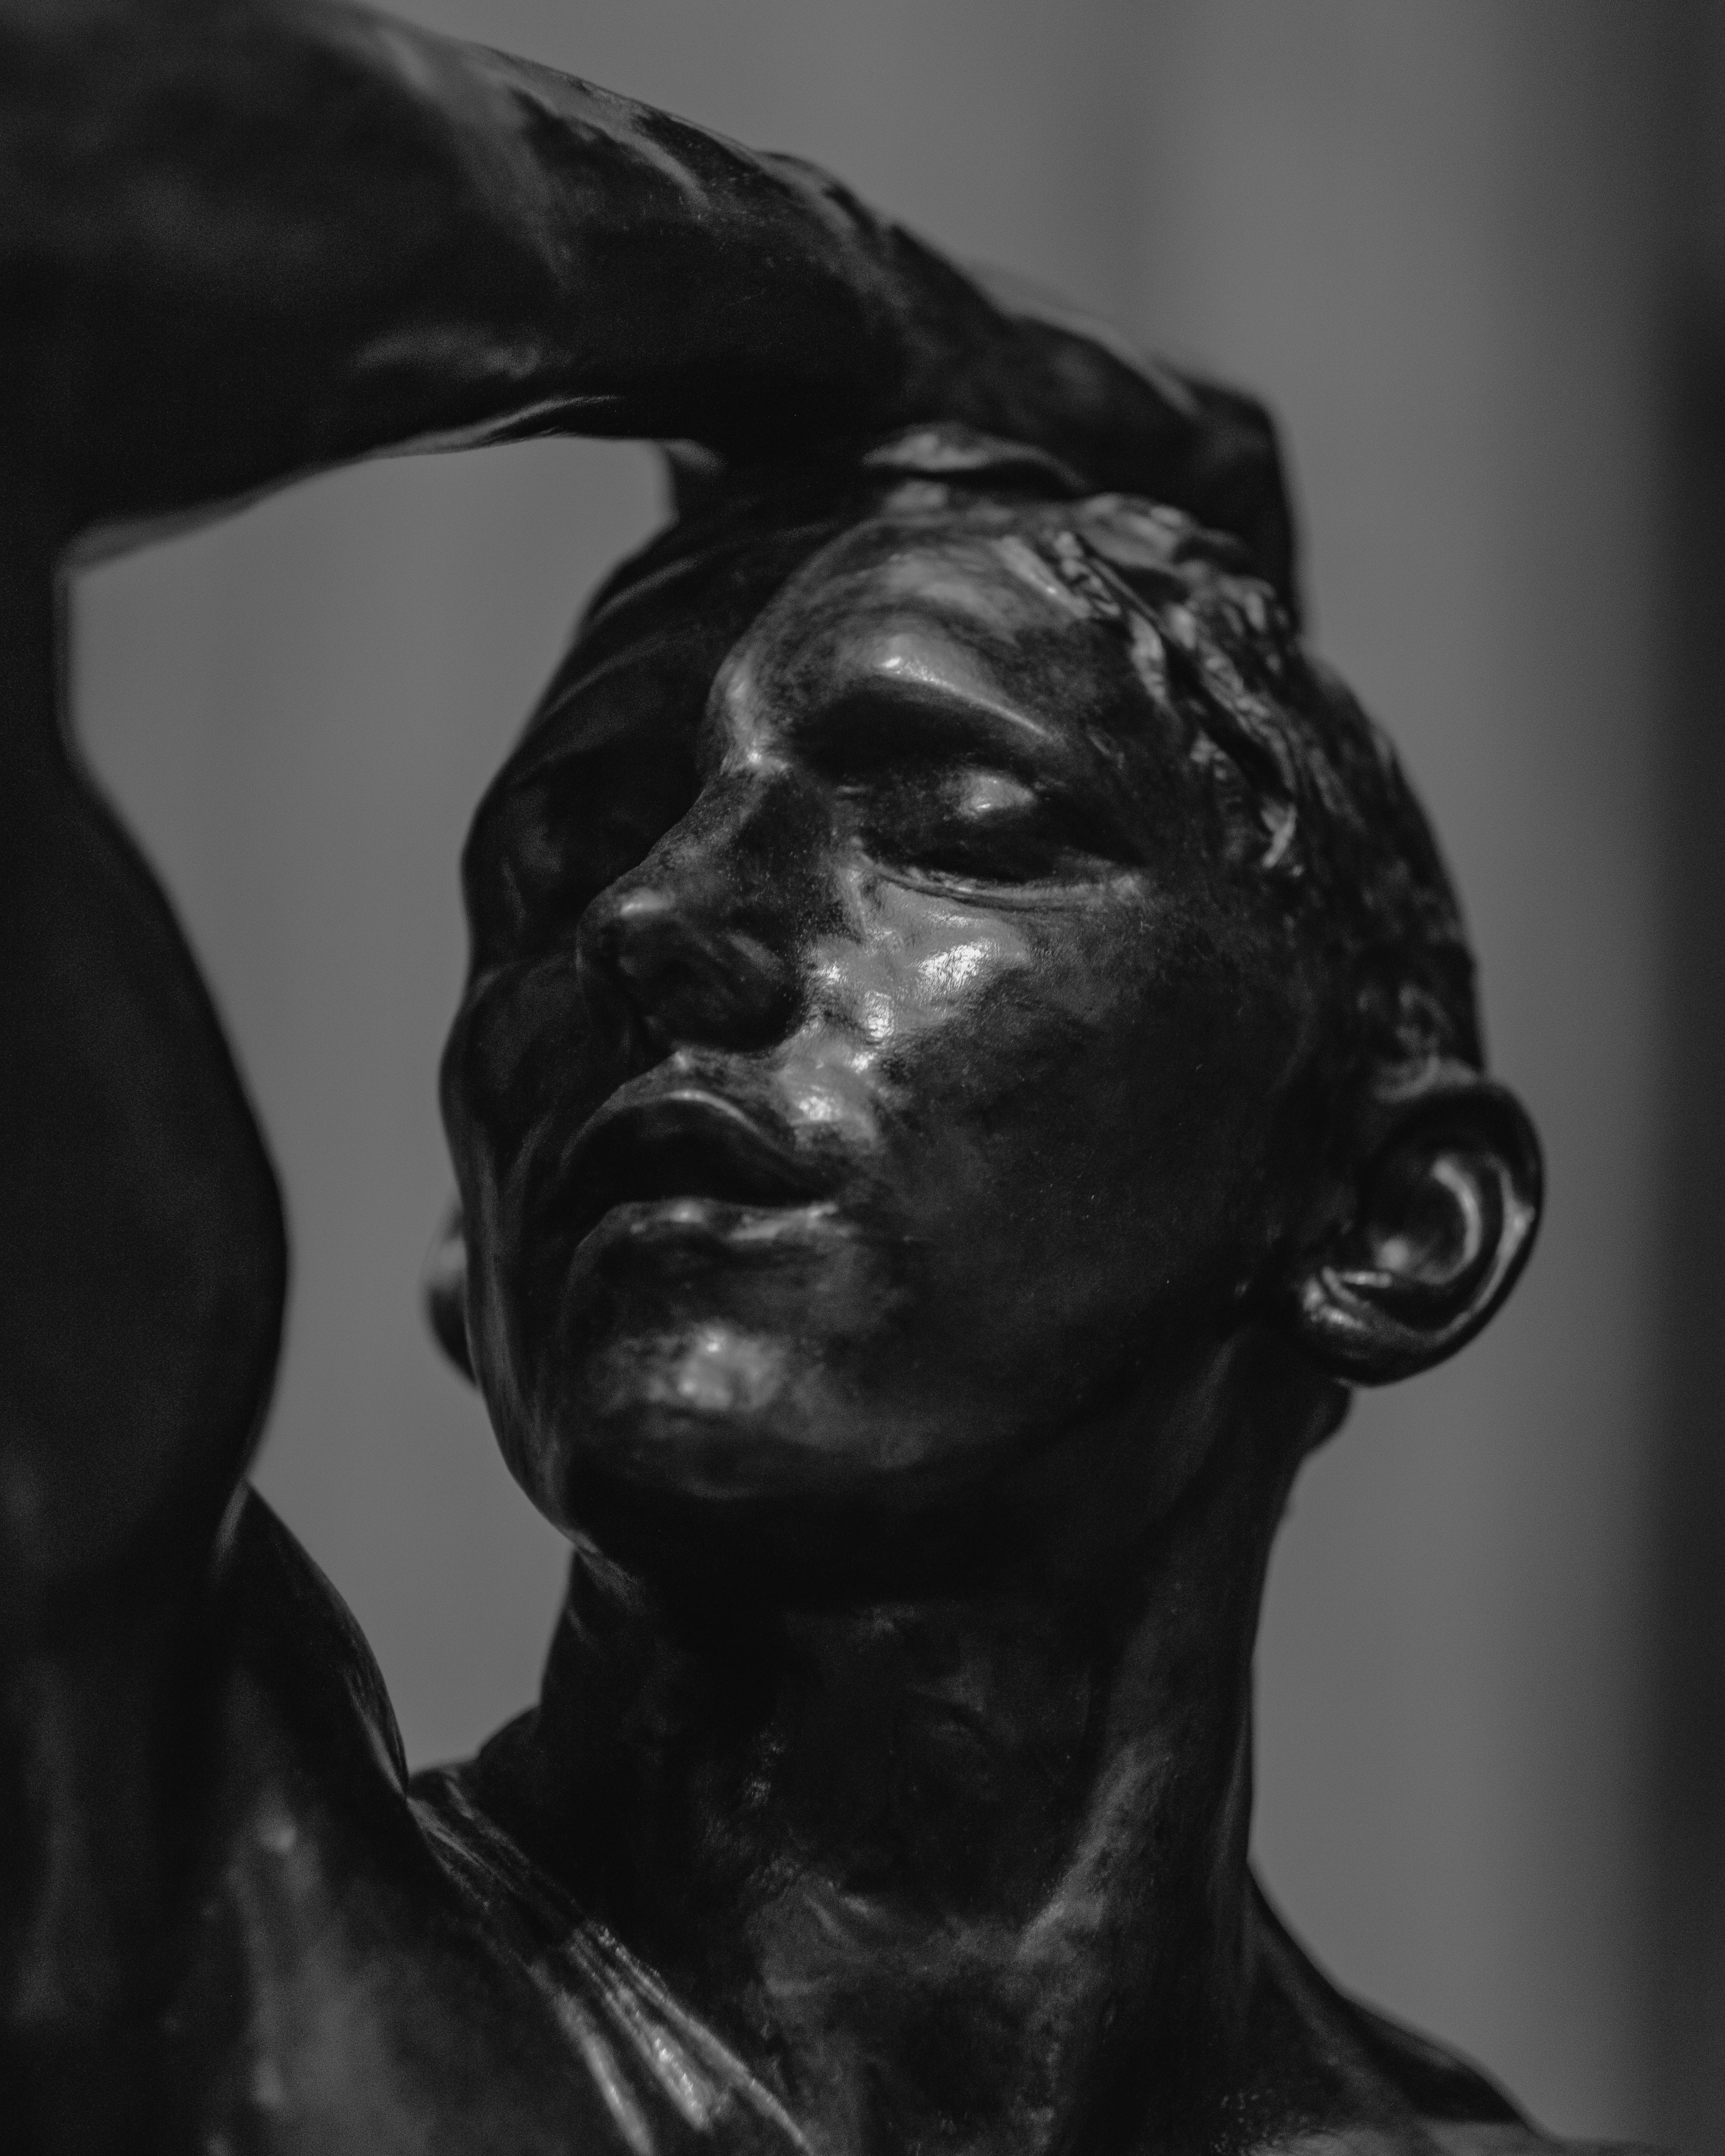 Bronze statue in all black, hand on head in dramatic pose